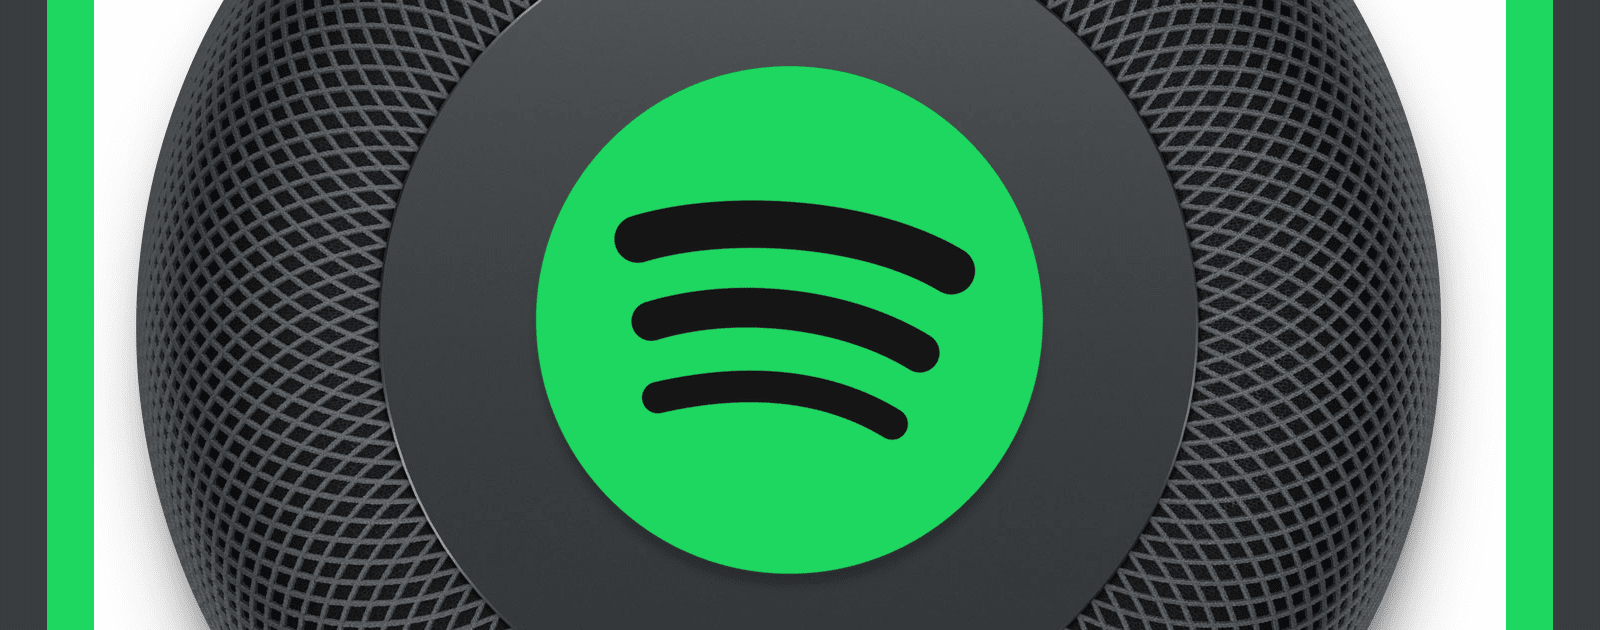 Spotify Connect on HomePod